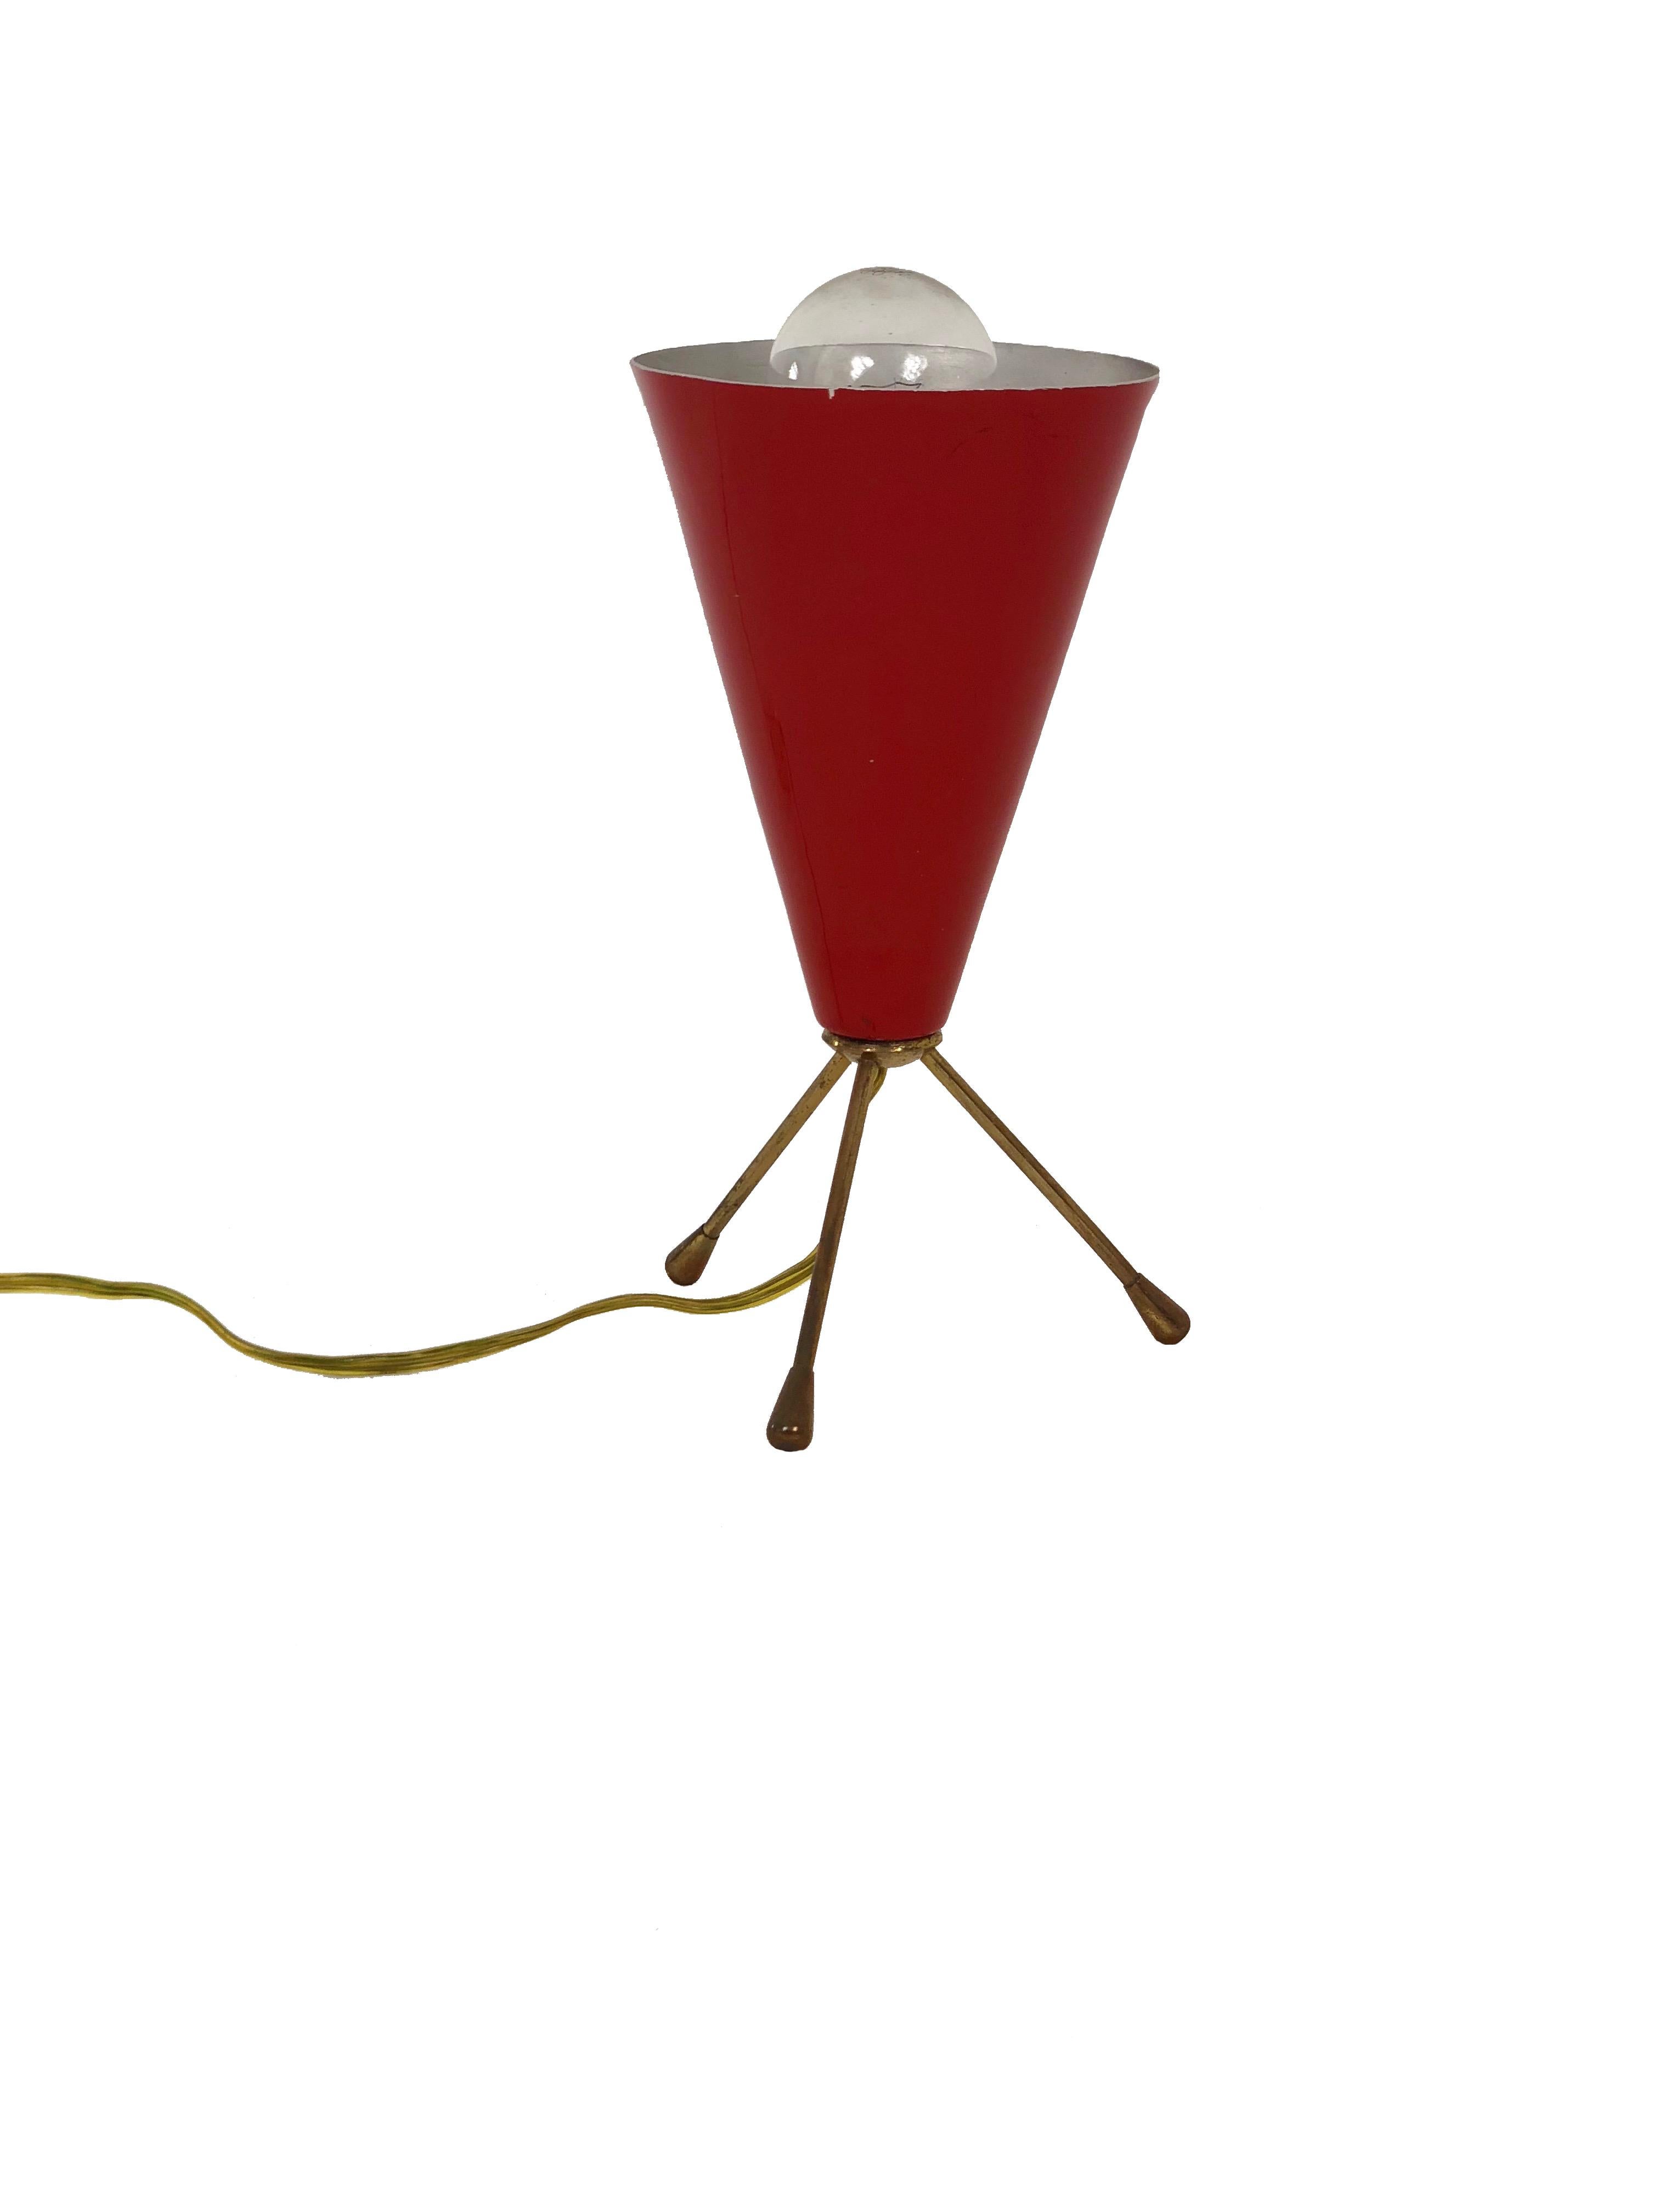 Petite Italian tripod cone shaped table lamp in brass and red lacquered metal.